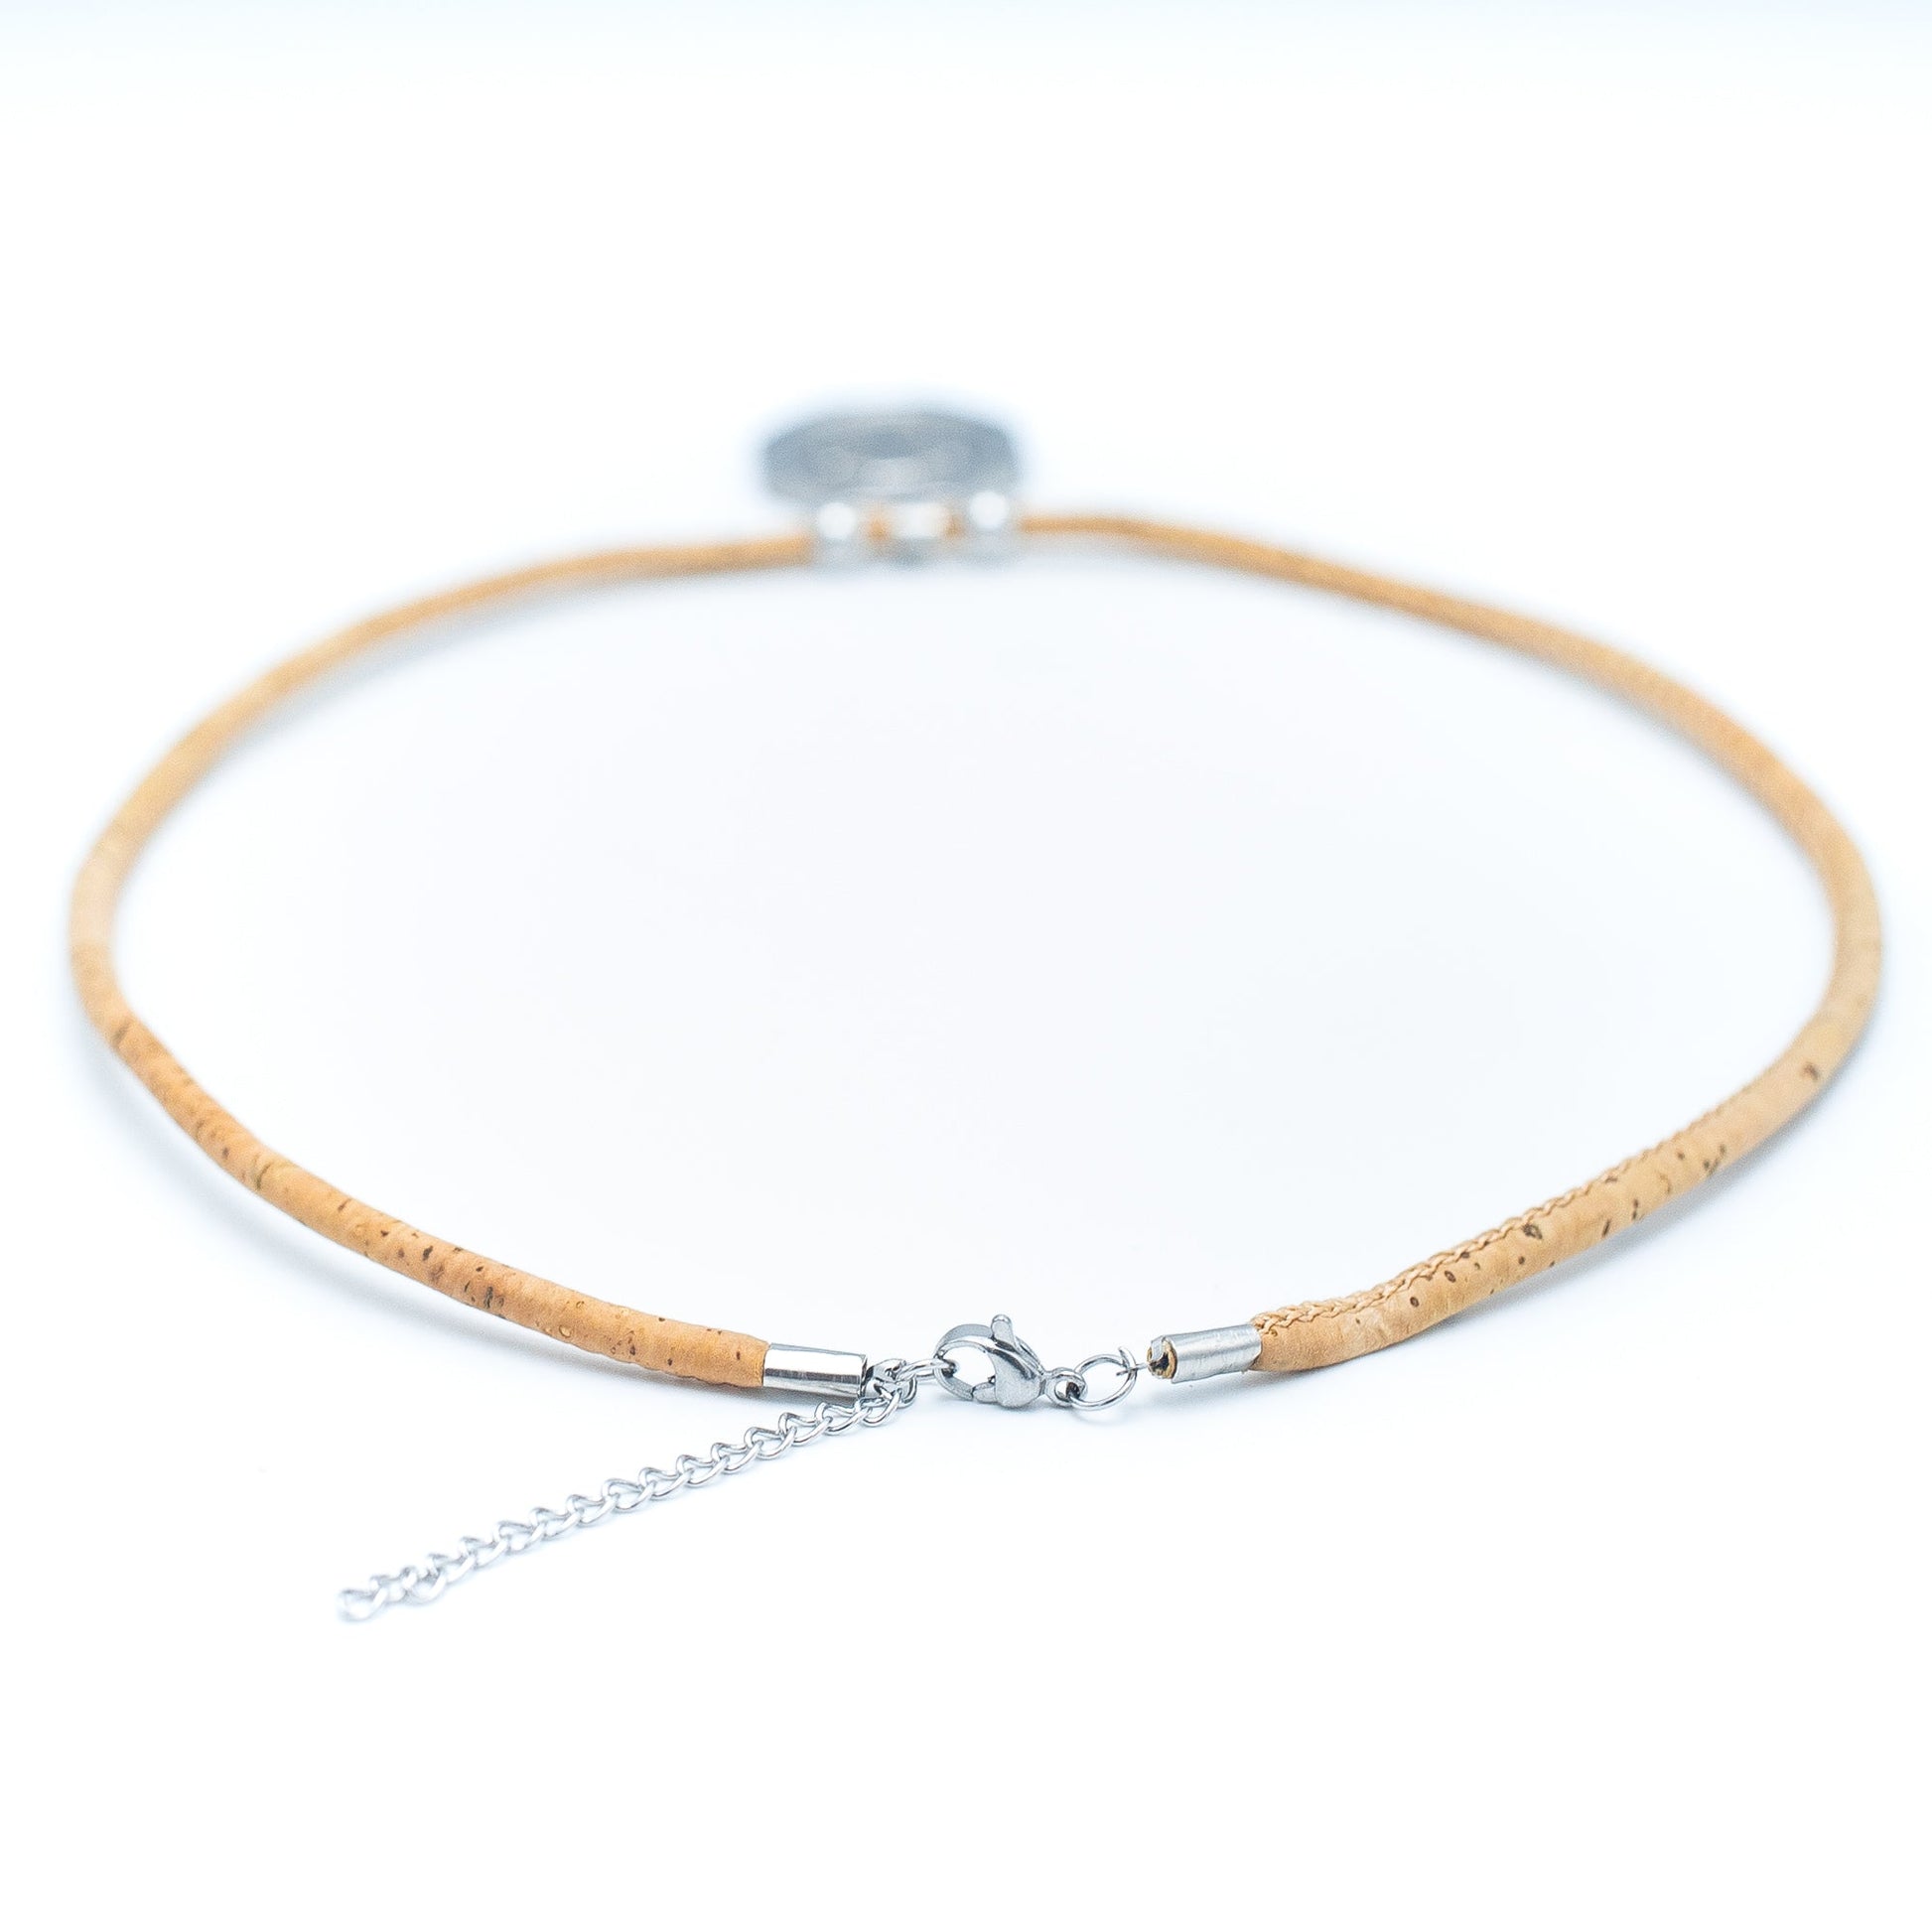 Handmade Natural Cork & Stainless Steel Necklace | THE CORK COLLECTION